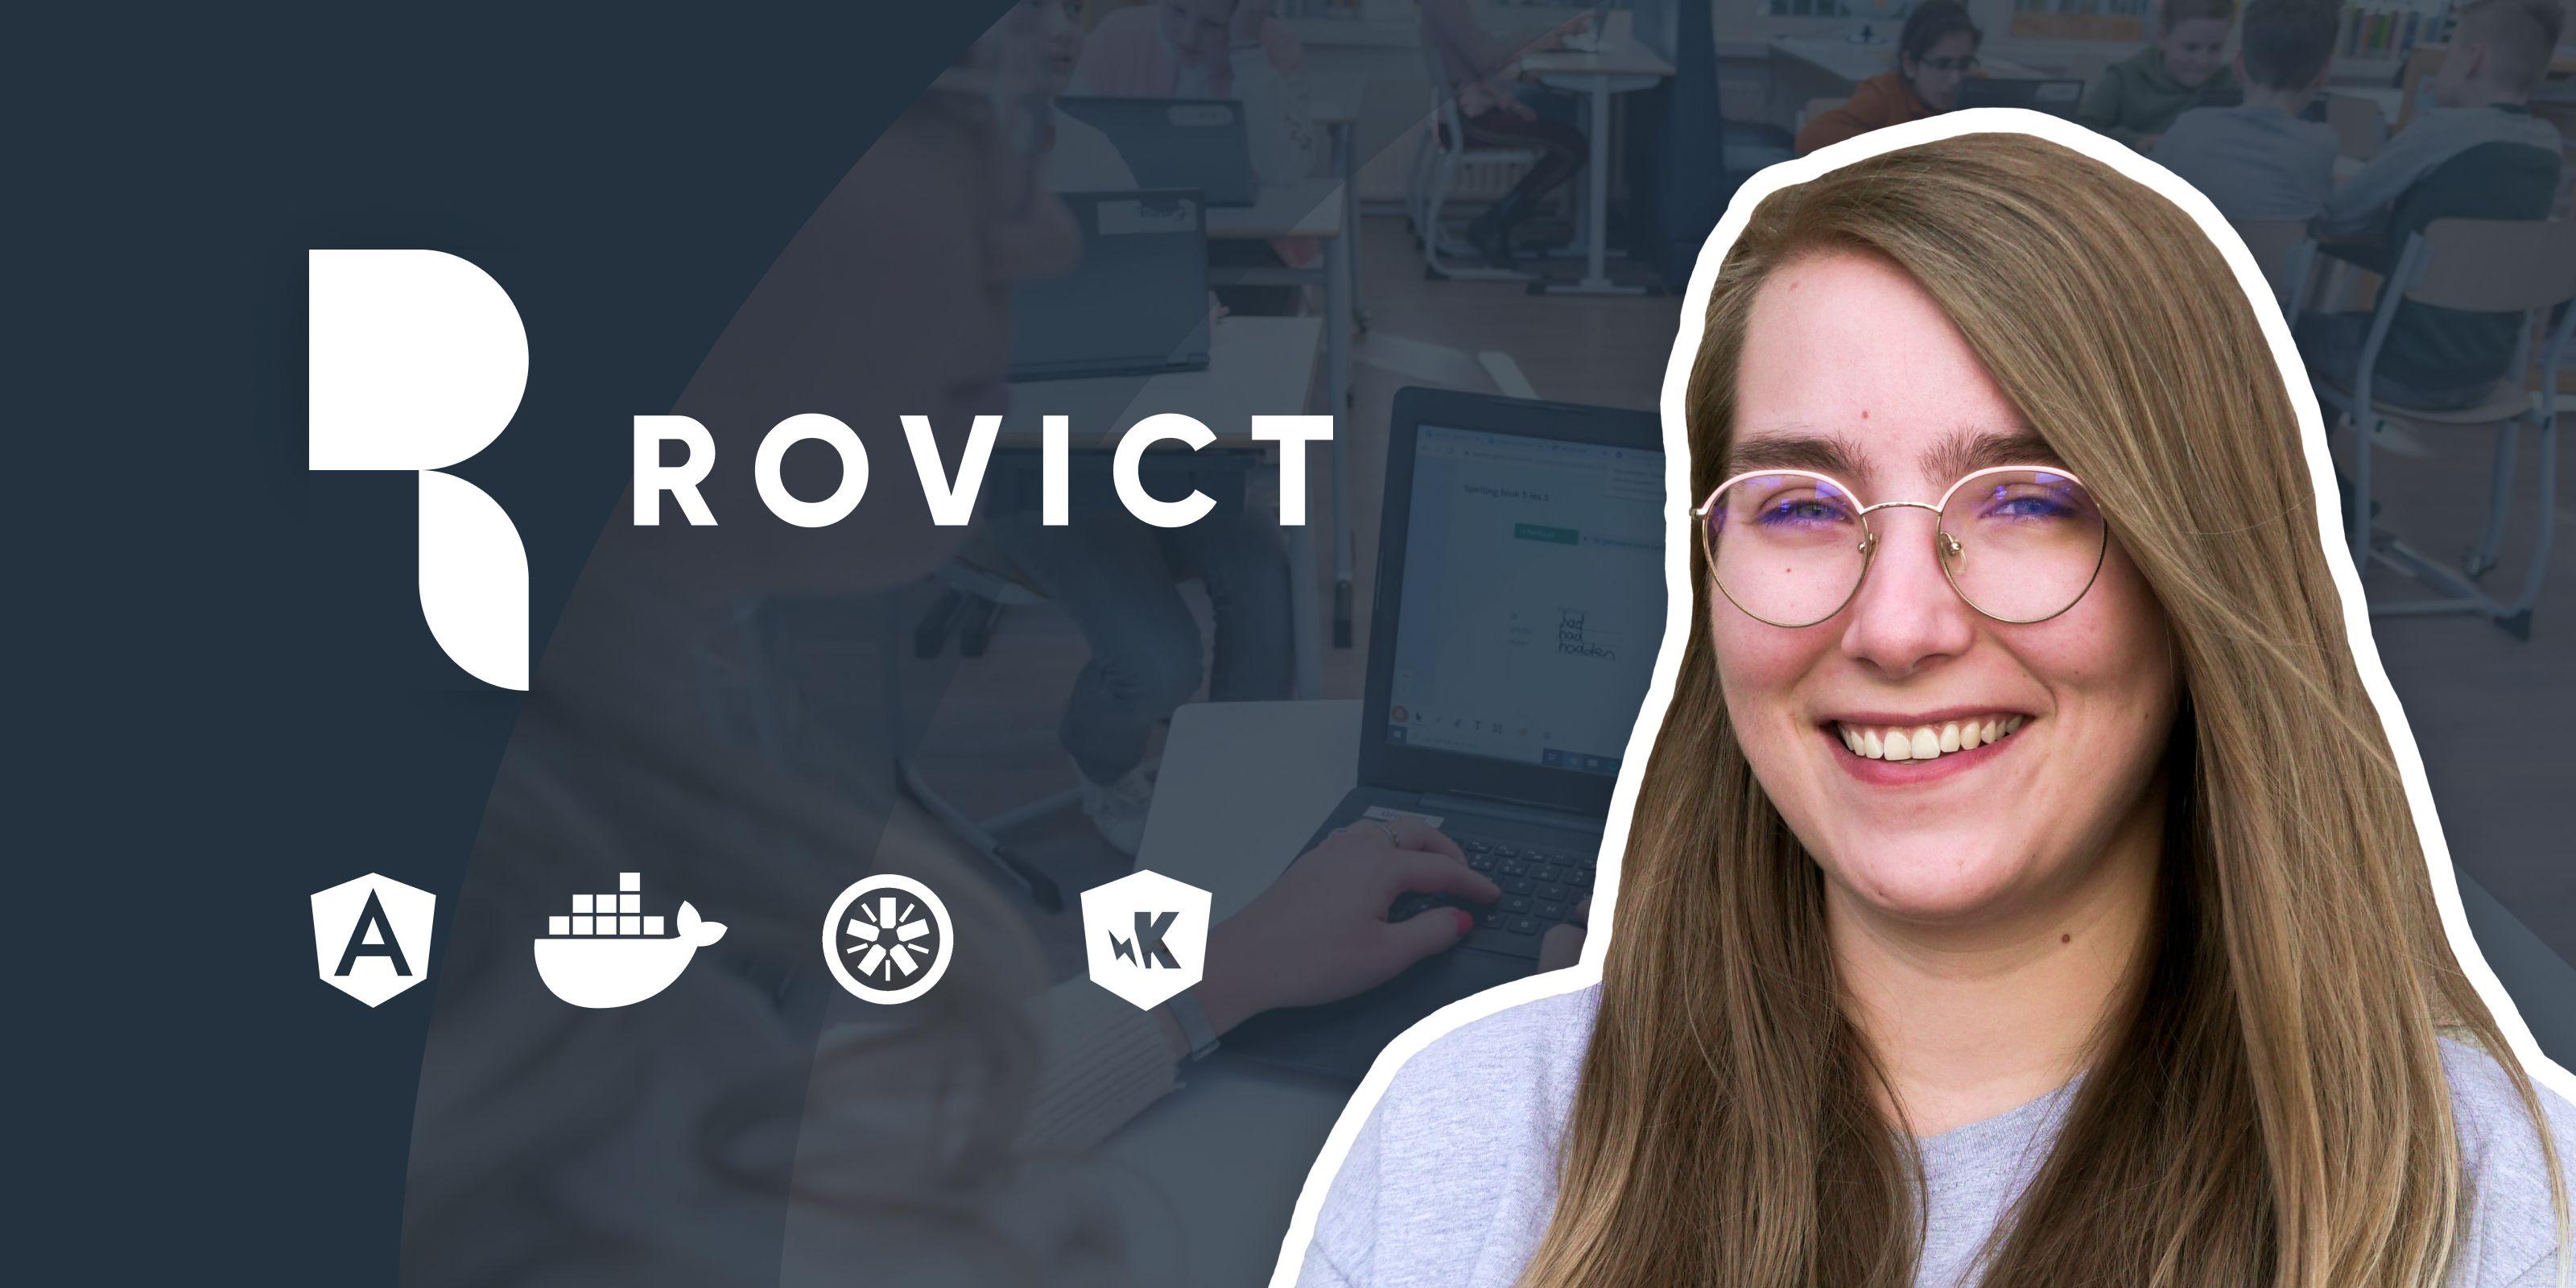 Case Study: Mandy at Rovict